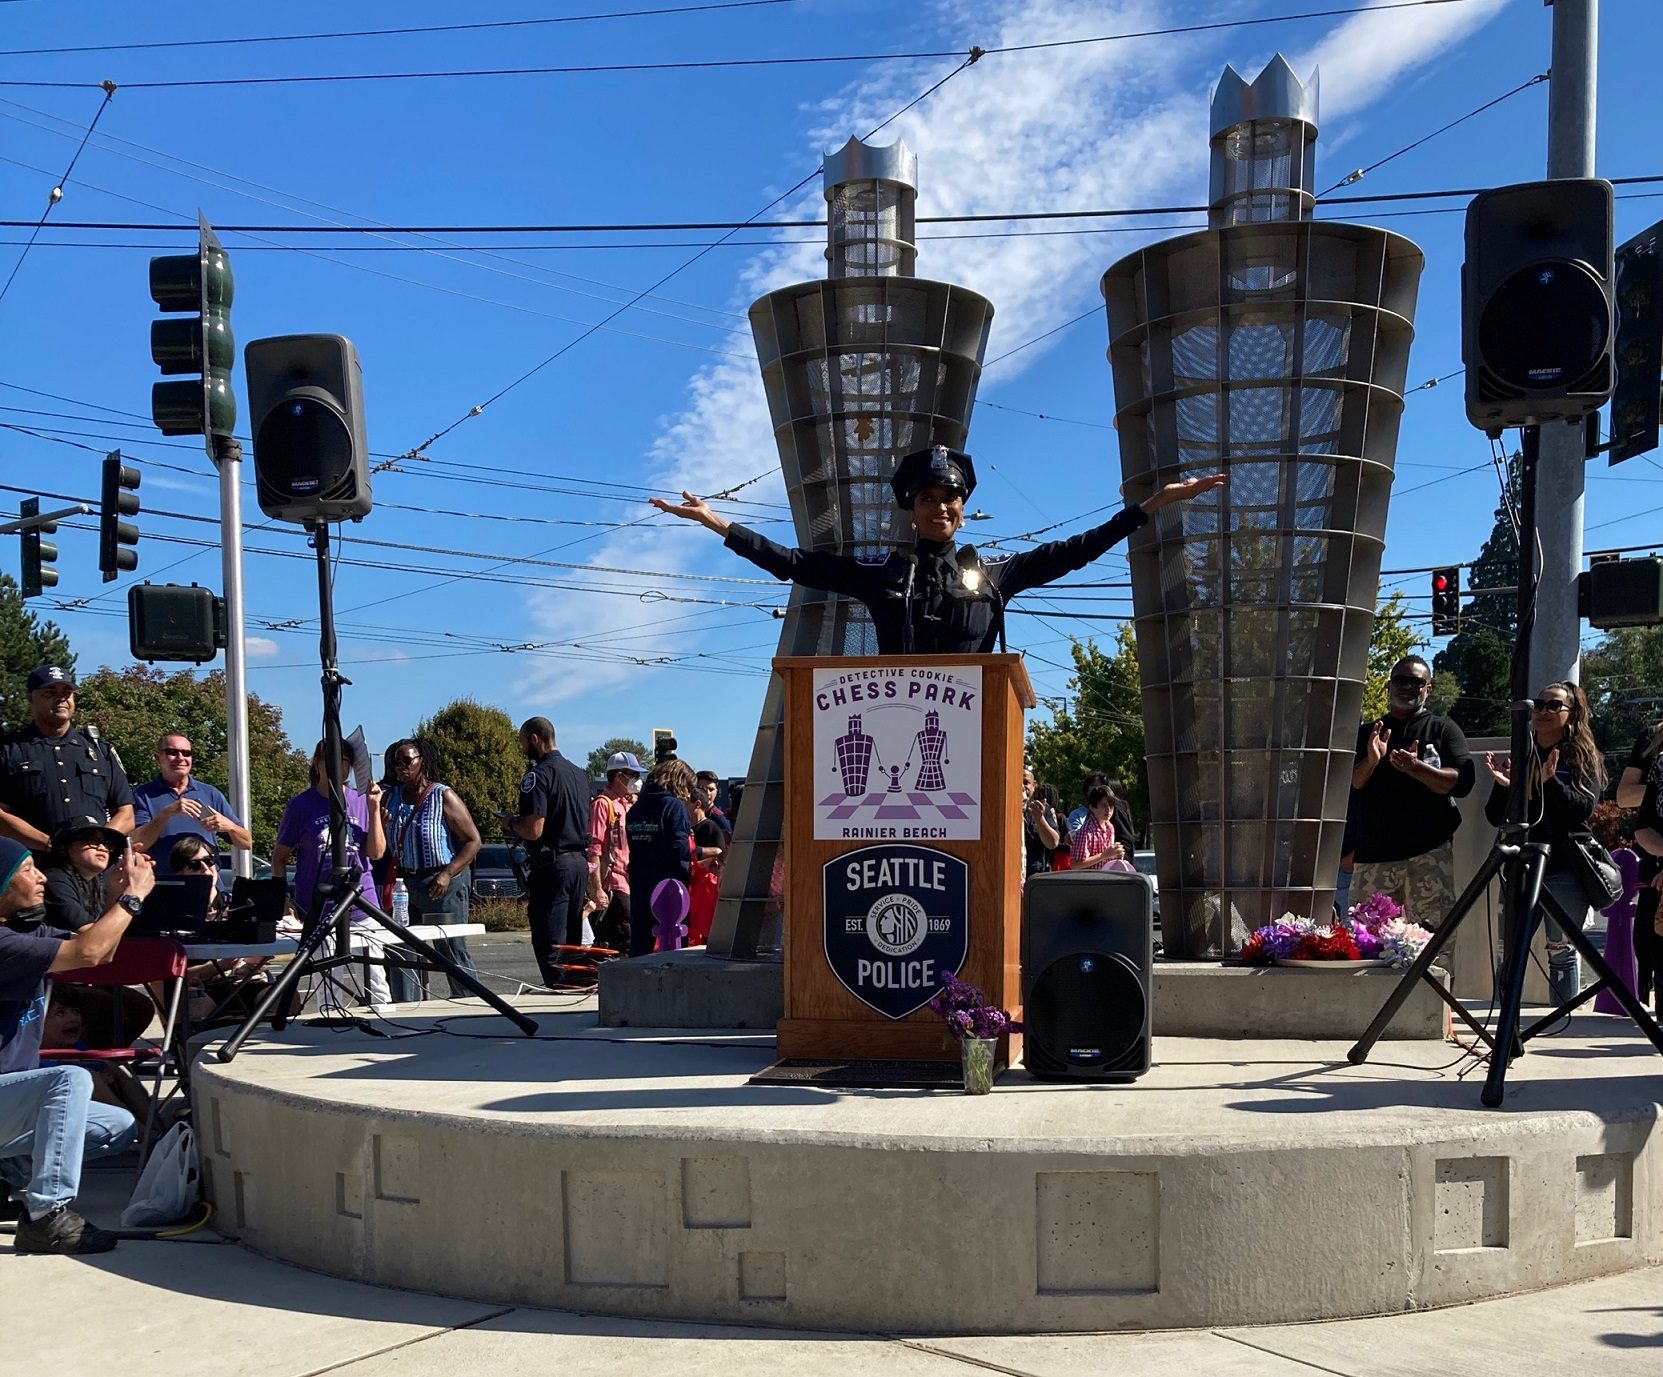 Detective Cookie takes in the moment while speaking at a podium at the newly opened chess park. She has her hands raised in the air in celebration.